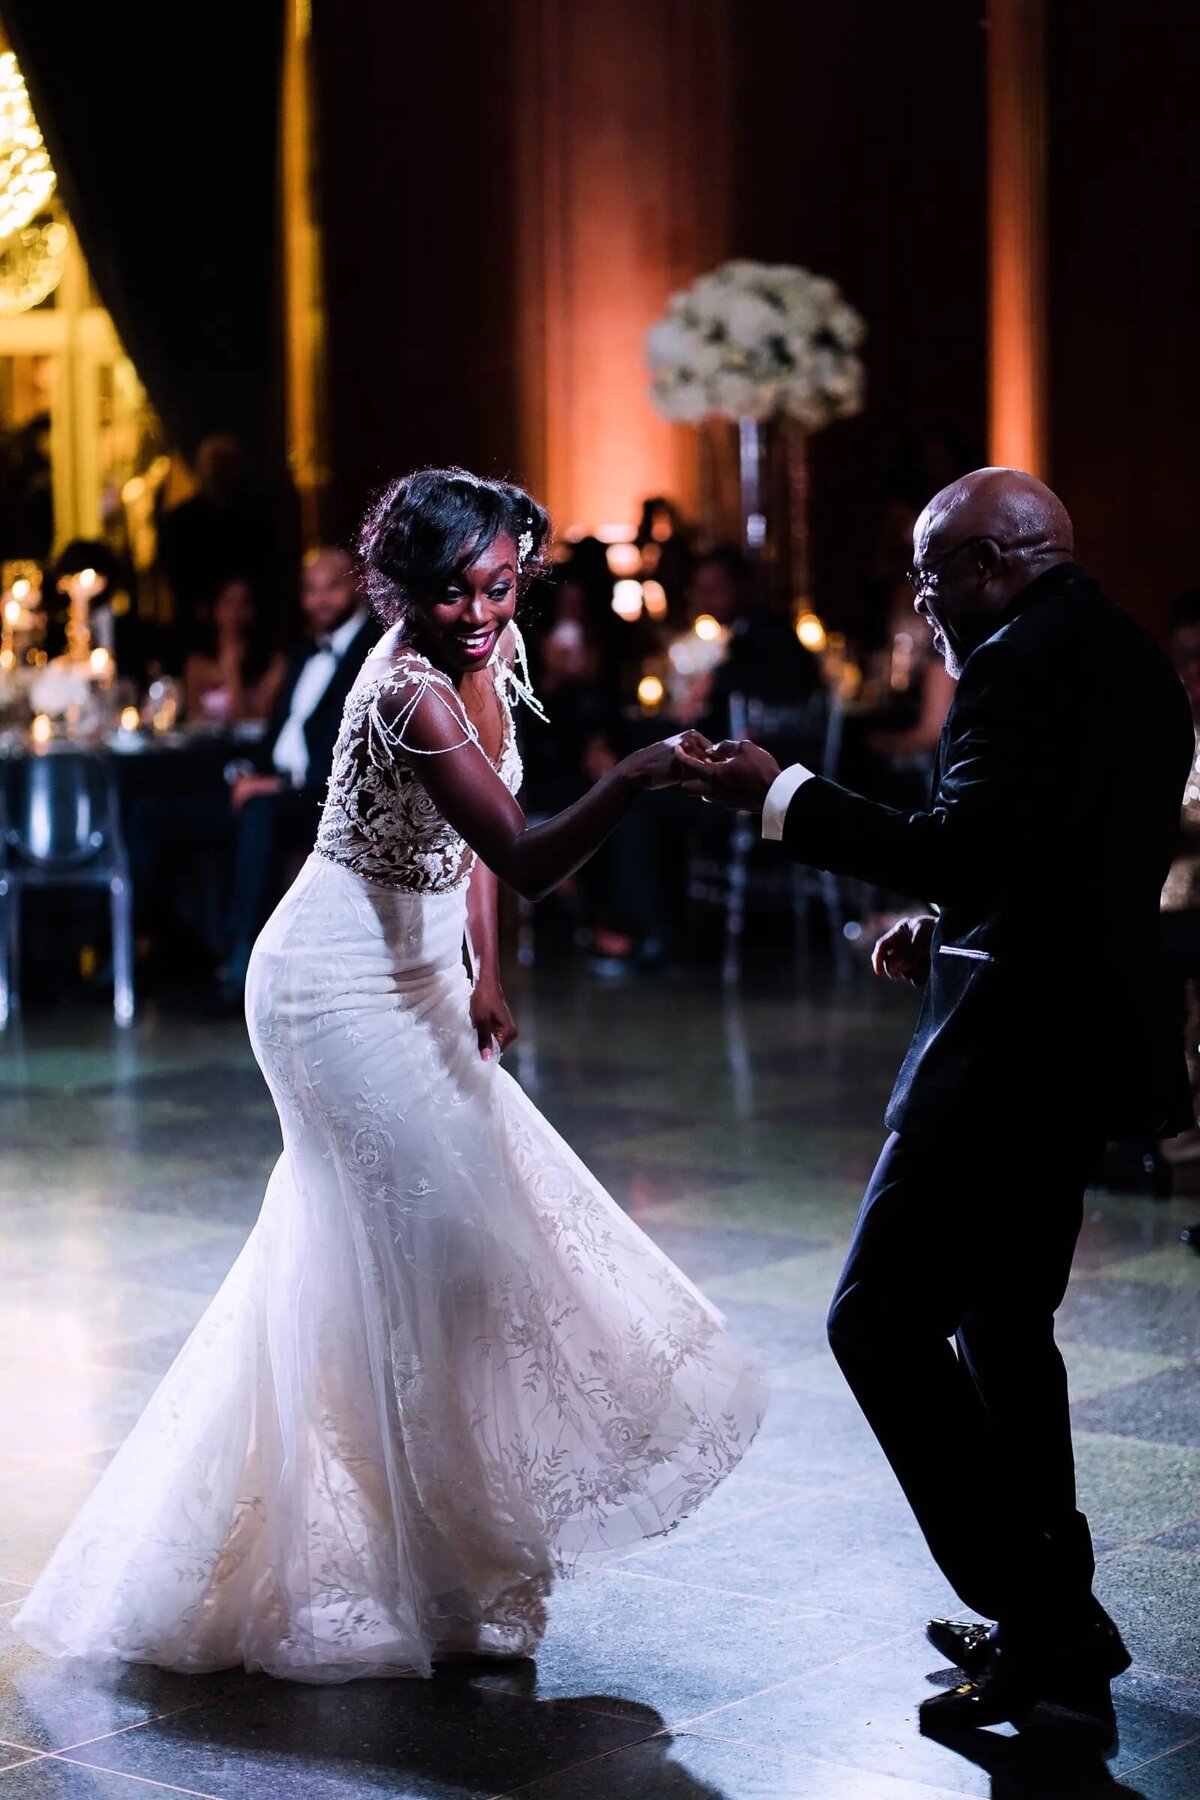 Bride dancing with an older man in a suit, guests seated in the background, at an elegantly lit wedding reception.